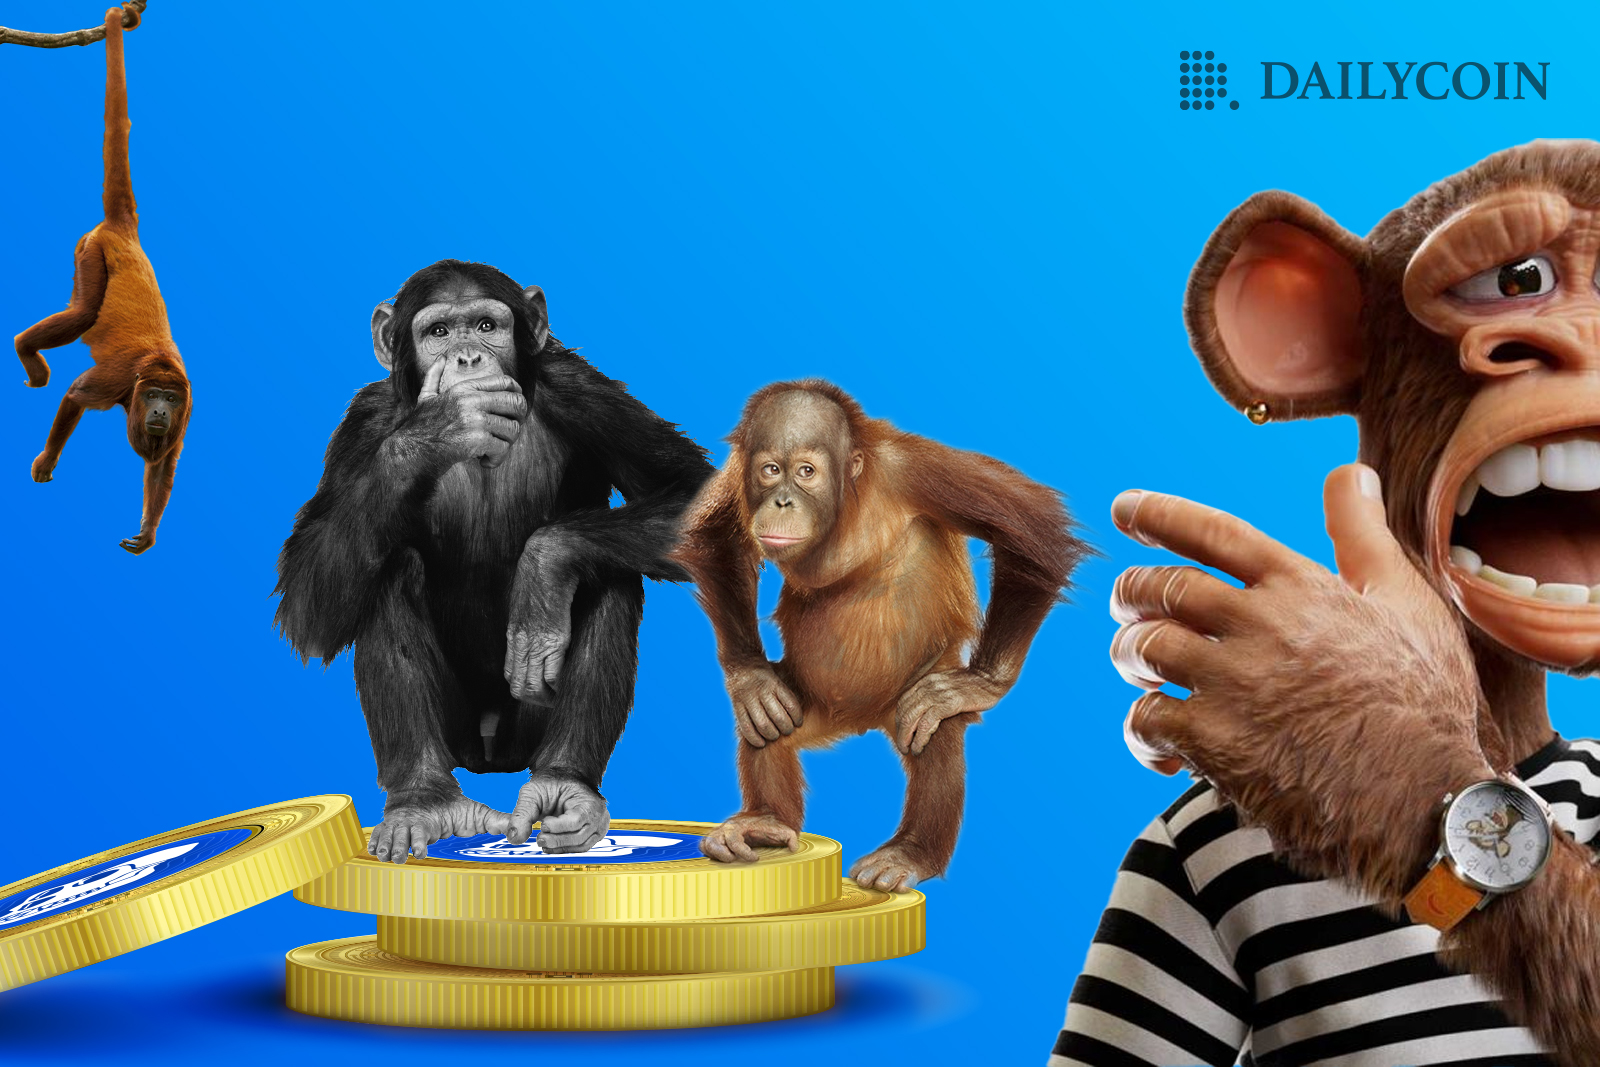 Apecoin apes sitting on golden coin discuss something.